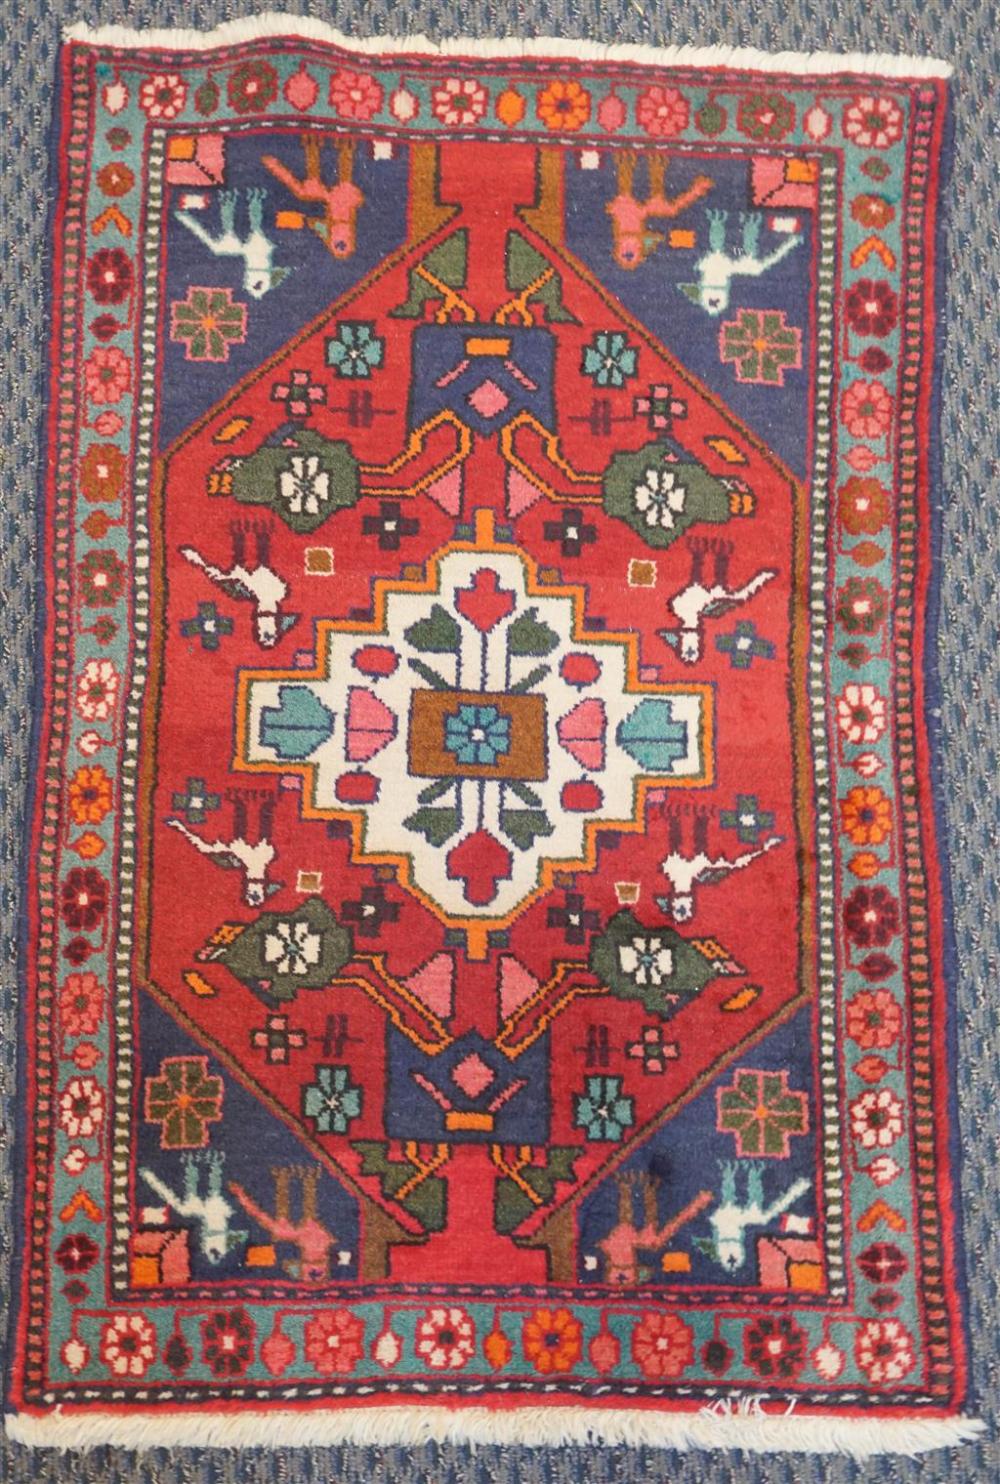 MALAYER RUG 3 FT 10 IN X 2 FT 32809b